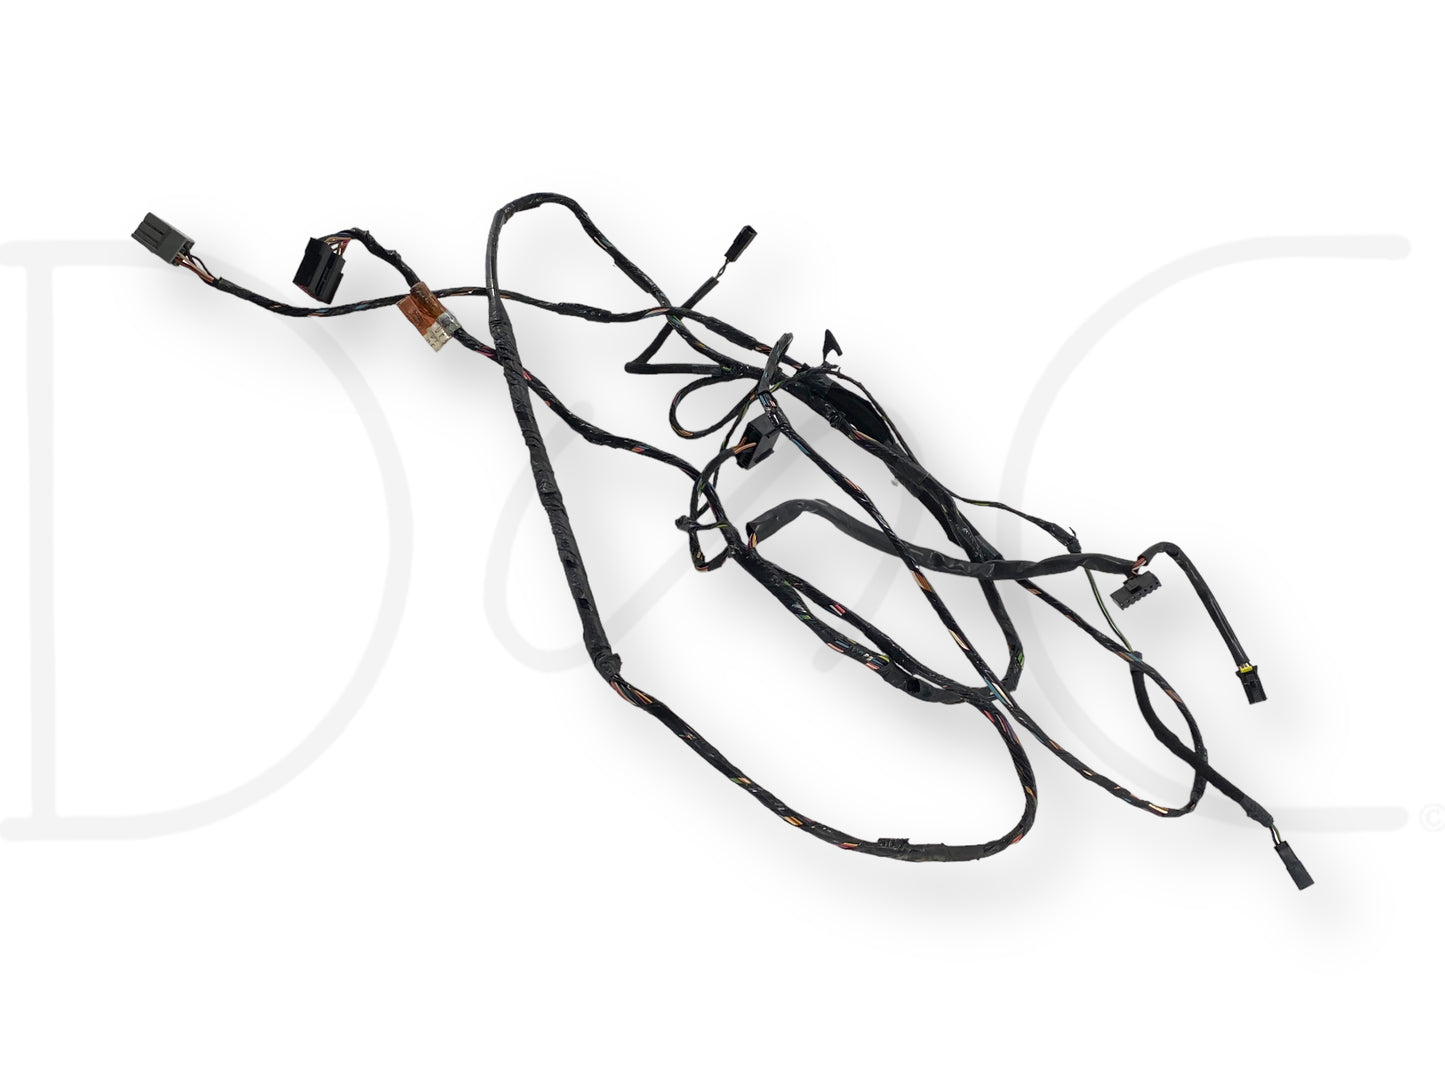 05-07 Ford F250 F350 Ceiling Mirror Sunroof Wire Harness OE 5C3T-17C712-P2604 Df